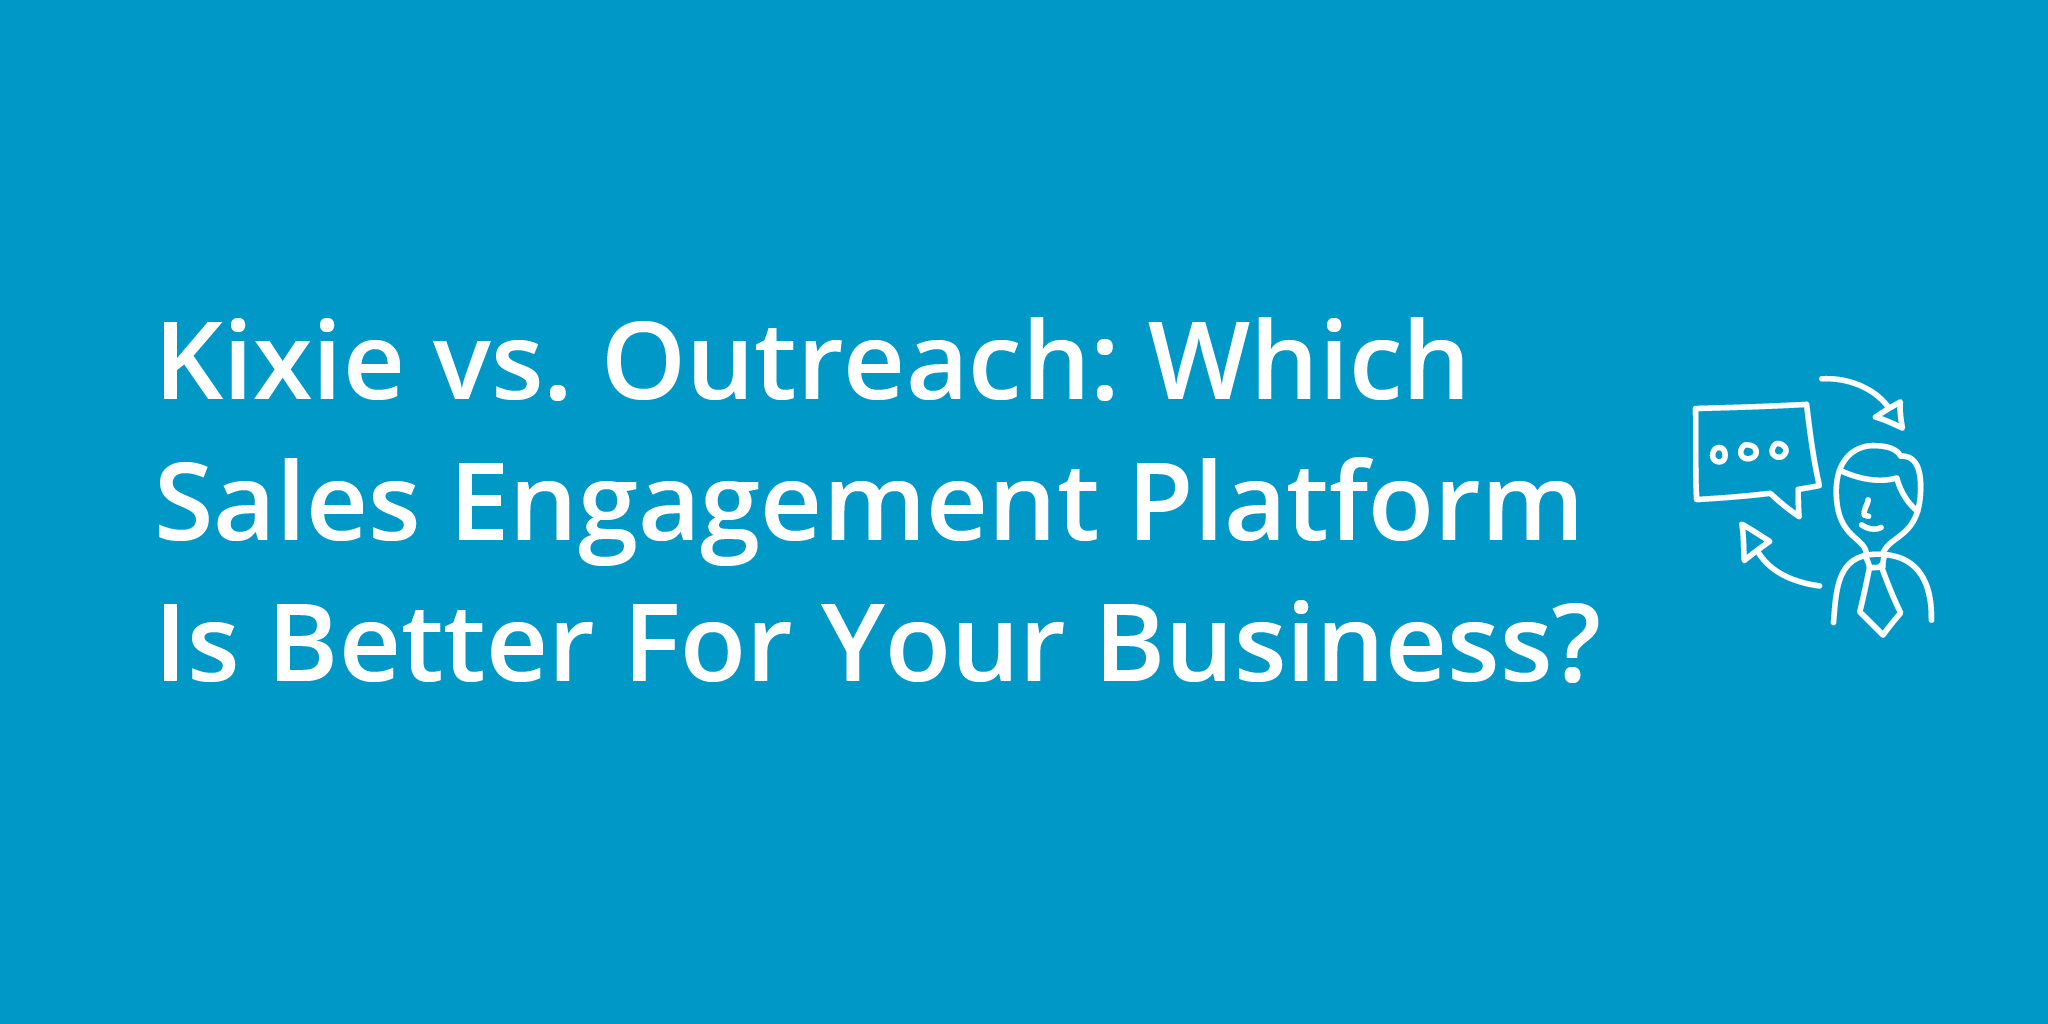 Kixie vs. Outreach: Which Sales Engagement Platform Is Better For Your Business? | Telephones for business